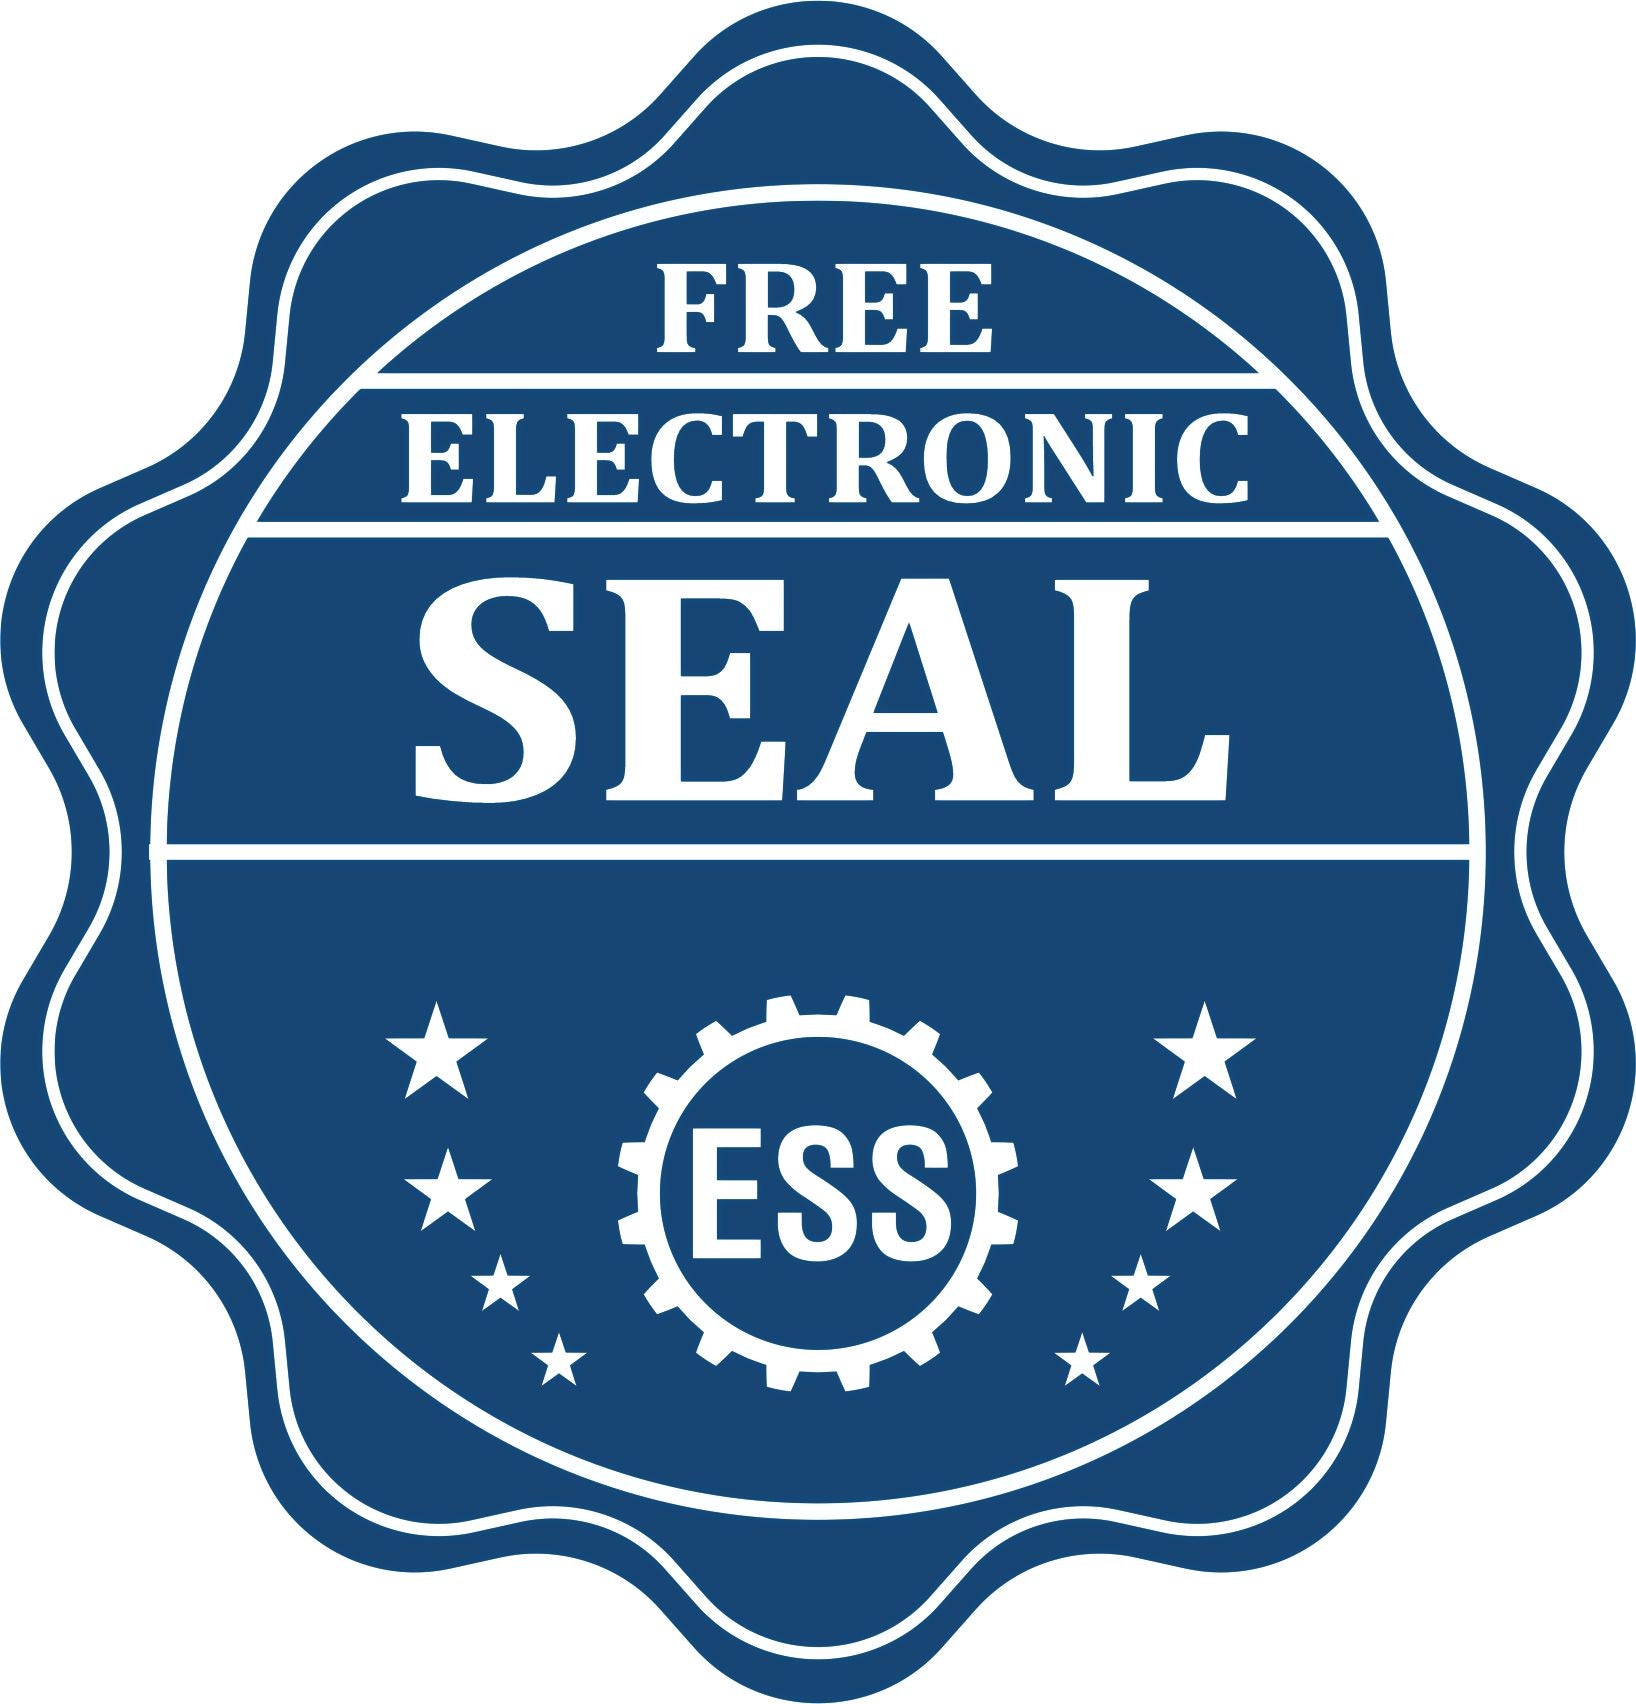 A badge showing a free electronic seal for the Heavy Duty Cast Iron North Carolina Architect Embosser with stars and the ESS gear on the emblem.